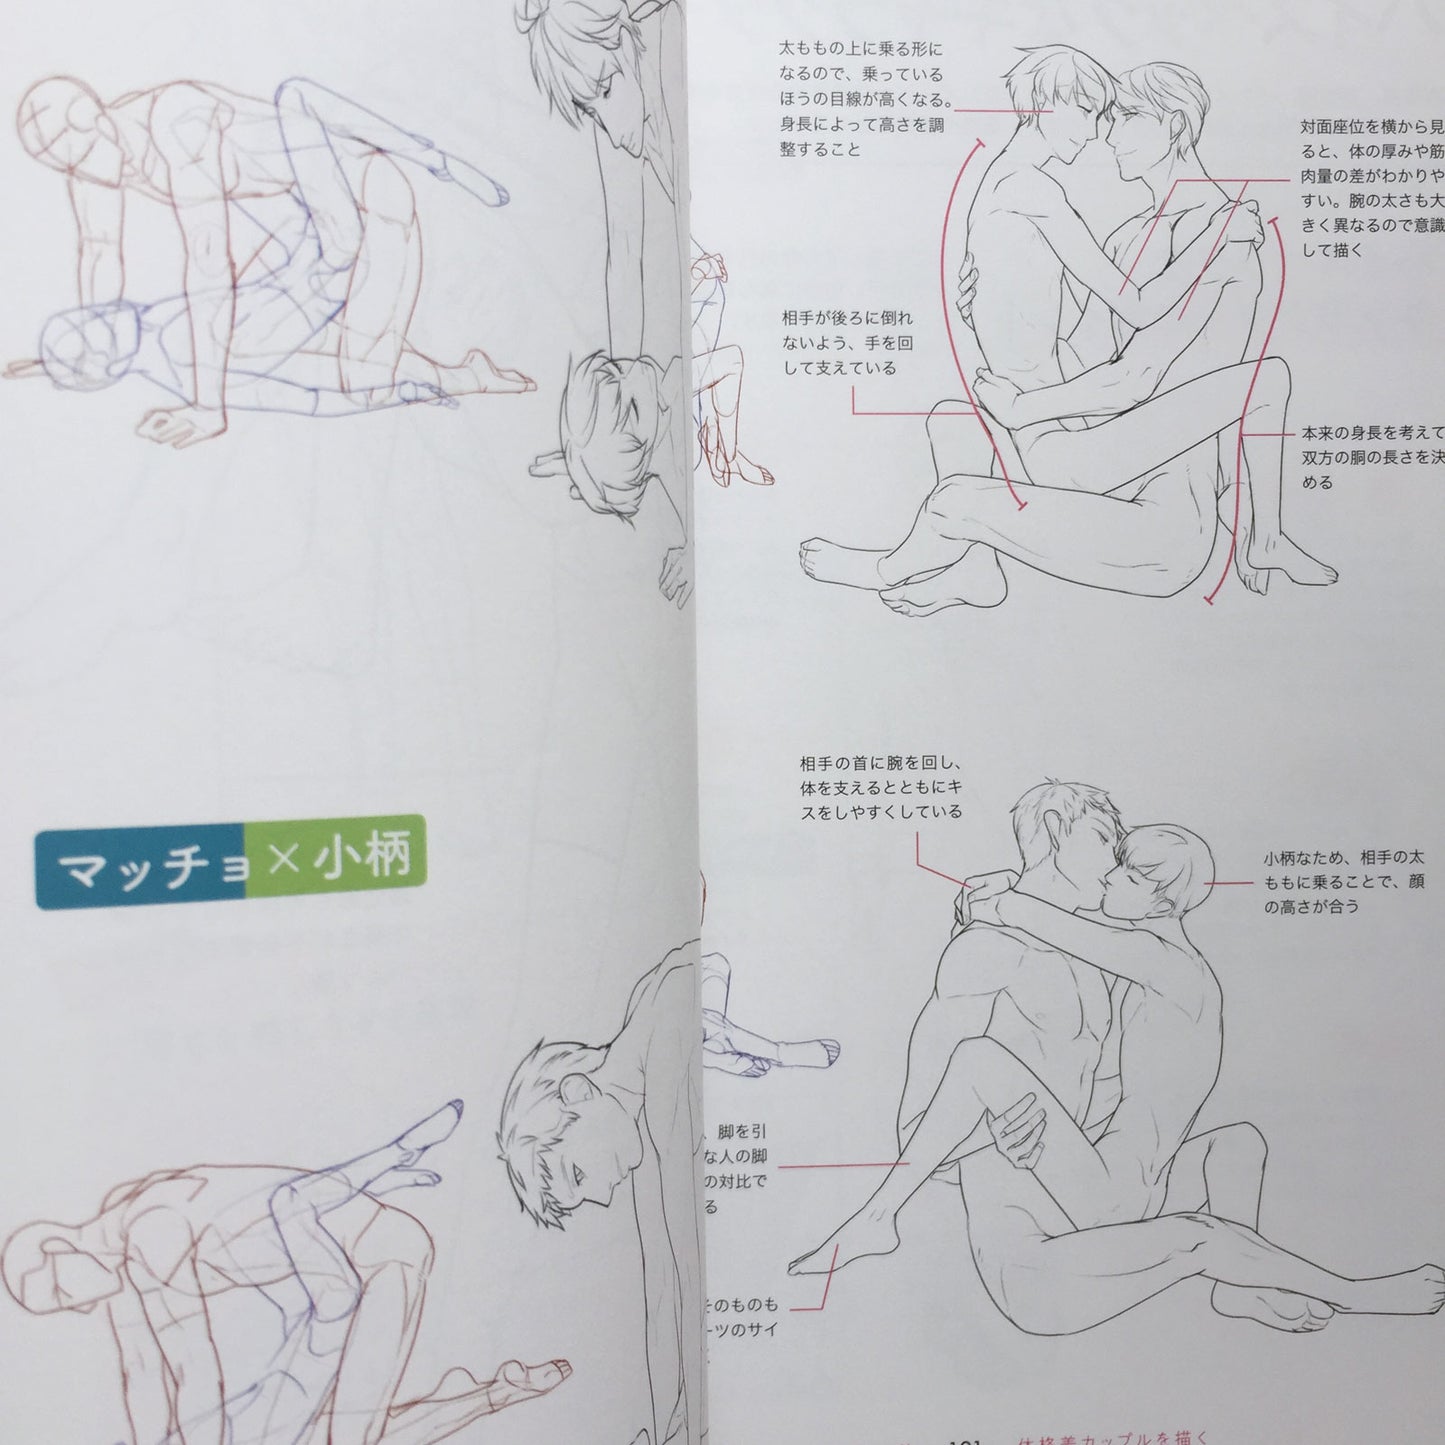 The first BL drawing basics and techniques